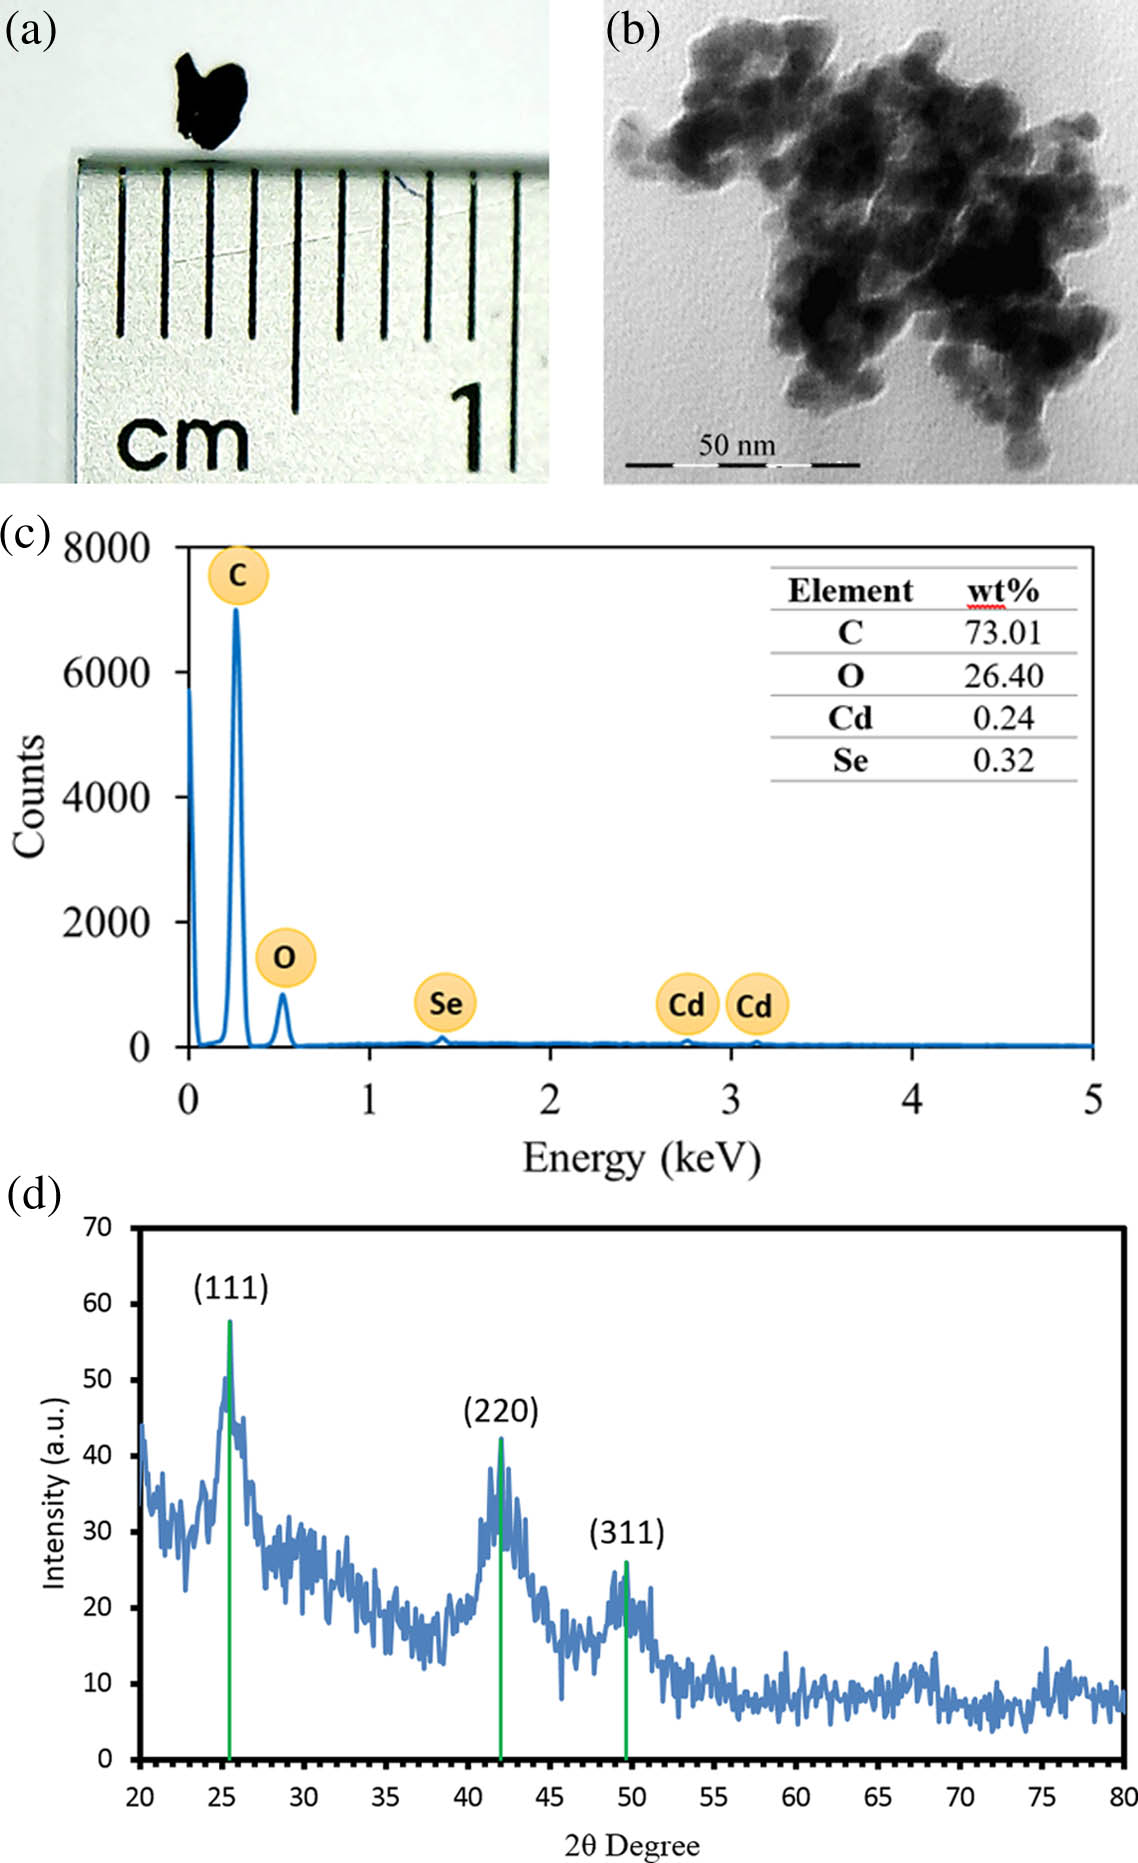 PMMA doped with CdSe QD physical characteristics. (a) The end result of the CdSe QD thin flake. (b) The TEM micrograph and selected area electron diffraction pattern confirmed that the particle size is within the nanometer range, (c) The energy dispersive x ray spectroscopy measurement showing the existence of cadmium and selenide. (d) The XRD patterns of cubic crystalline CdSe QD.